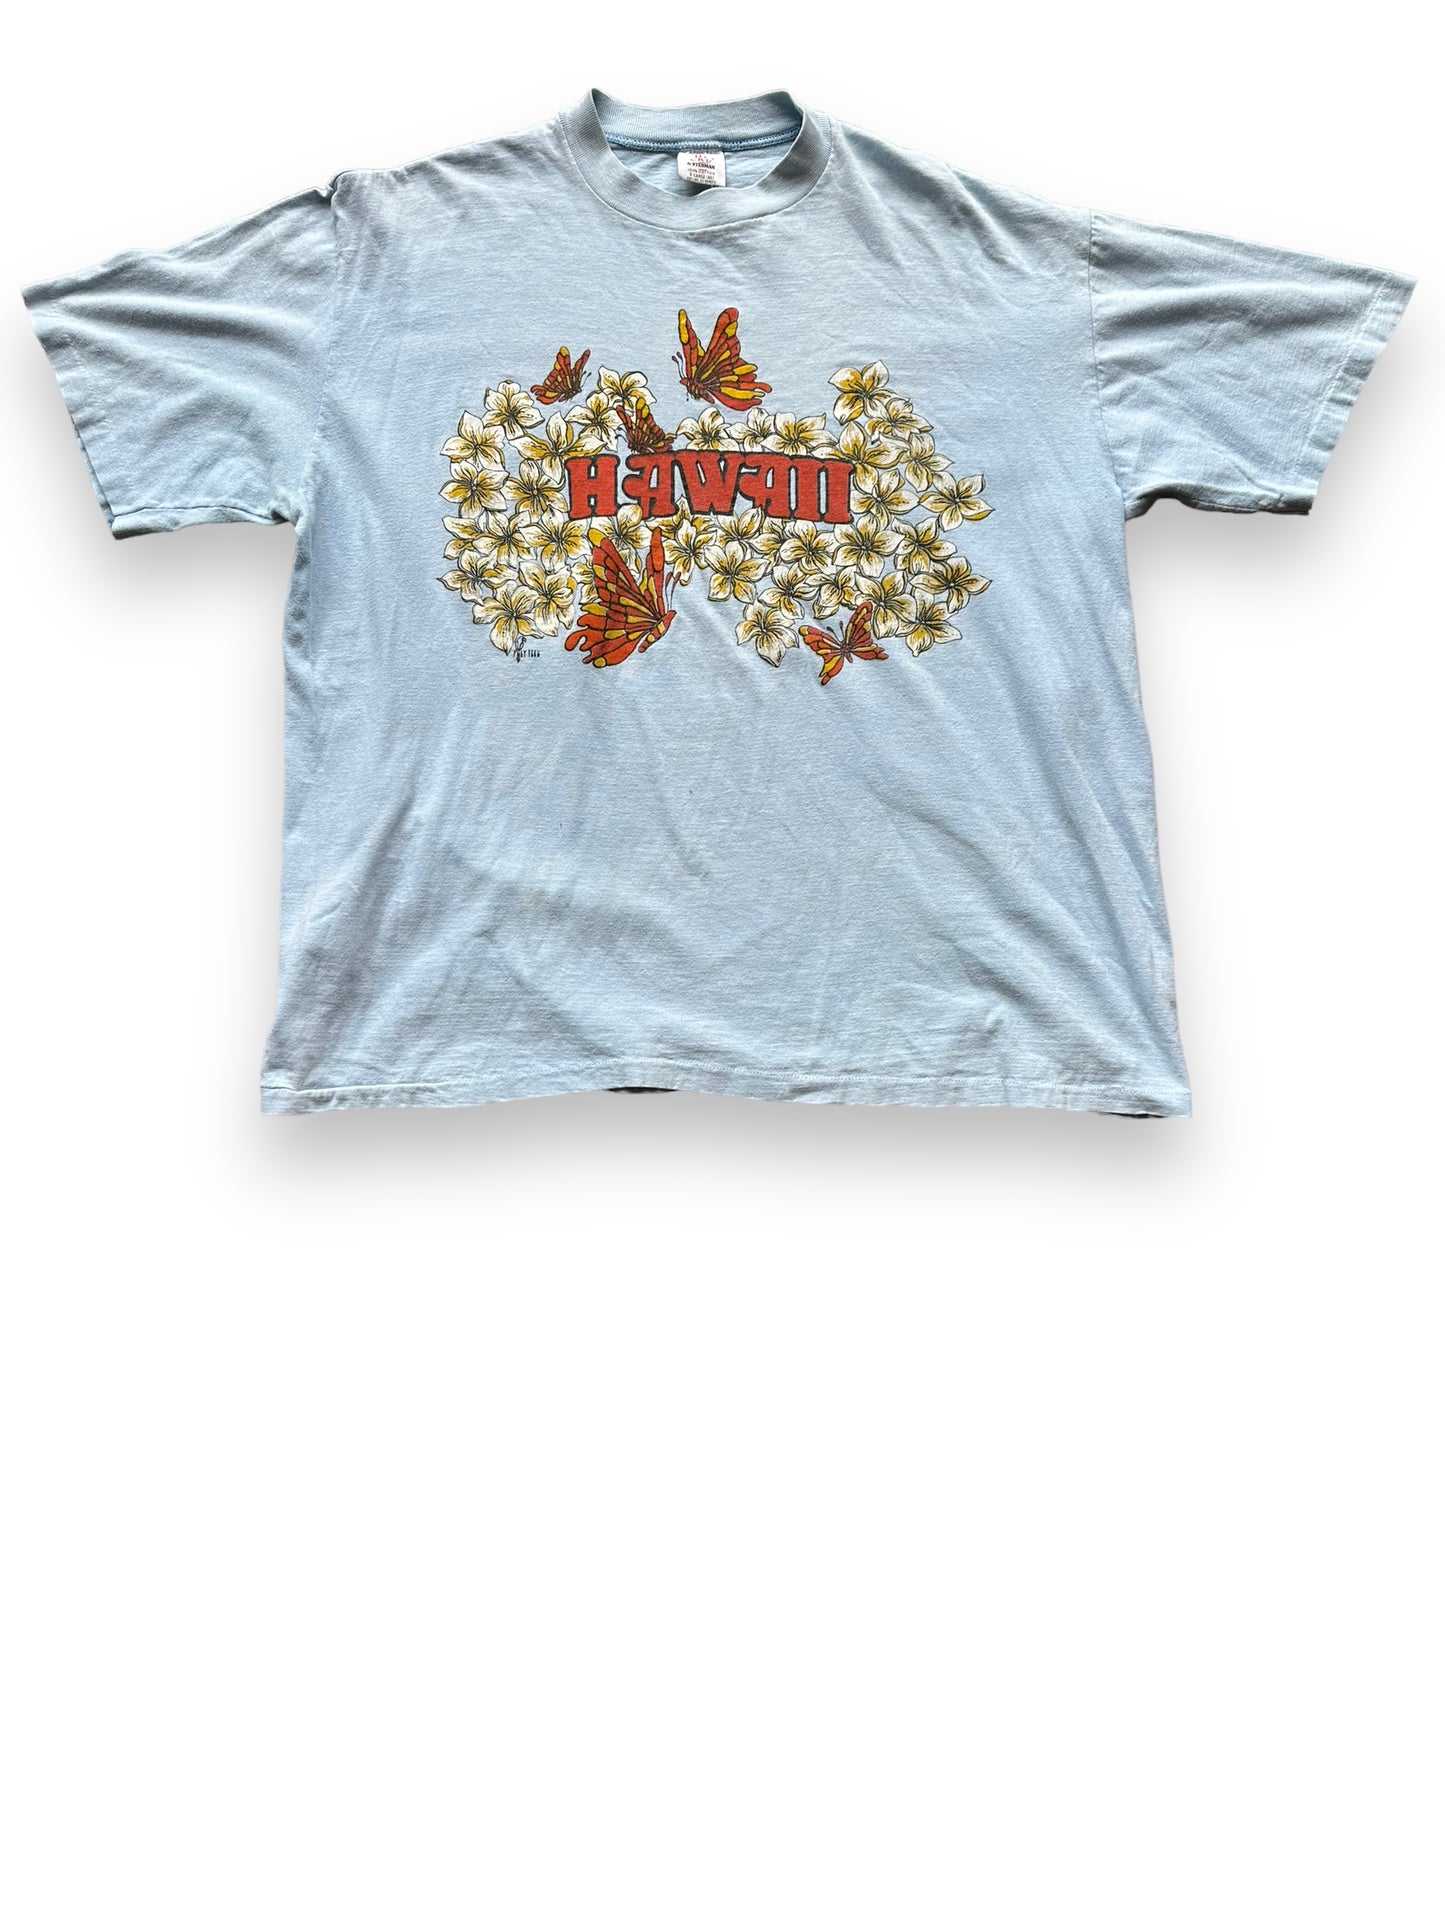 Front View of Vintage Hawaii Graphic Tee SZ XL | Vintage T-Shirts Seattle | Barn Owl Vintage Tees Seattle